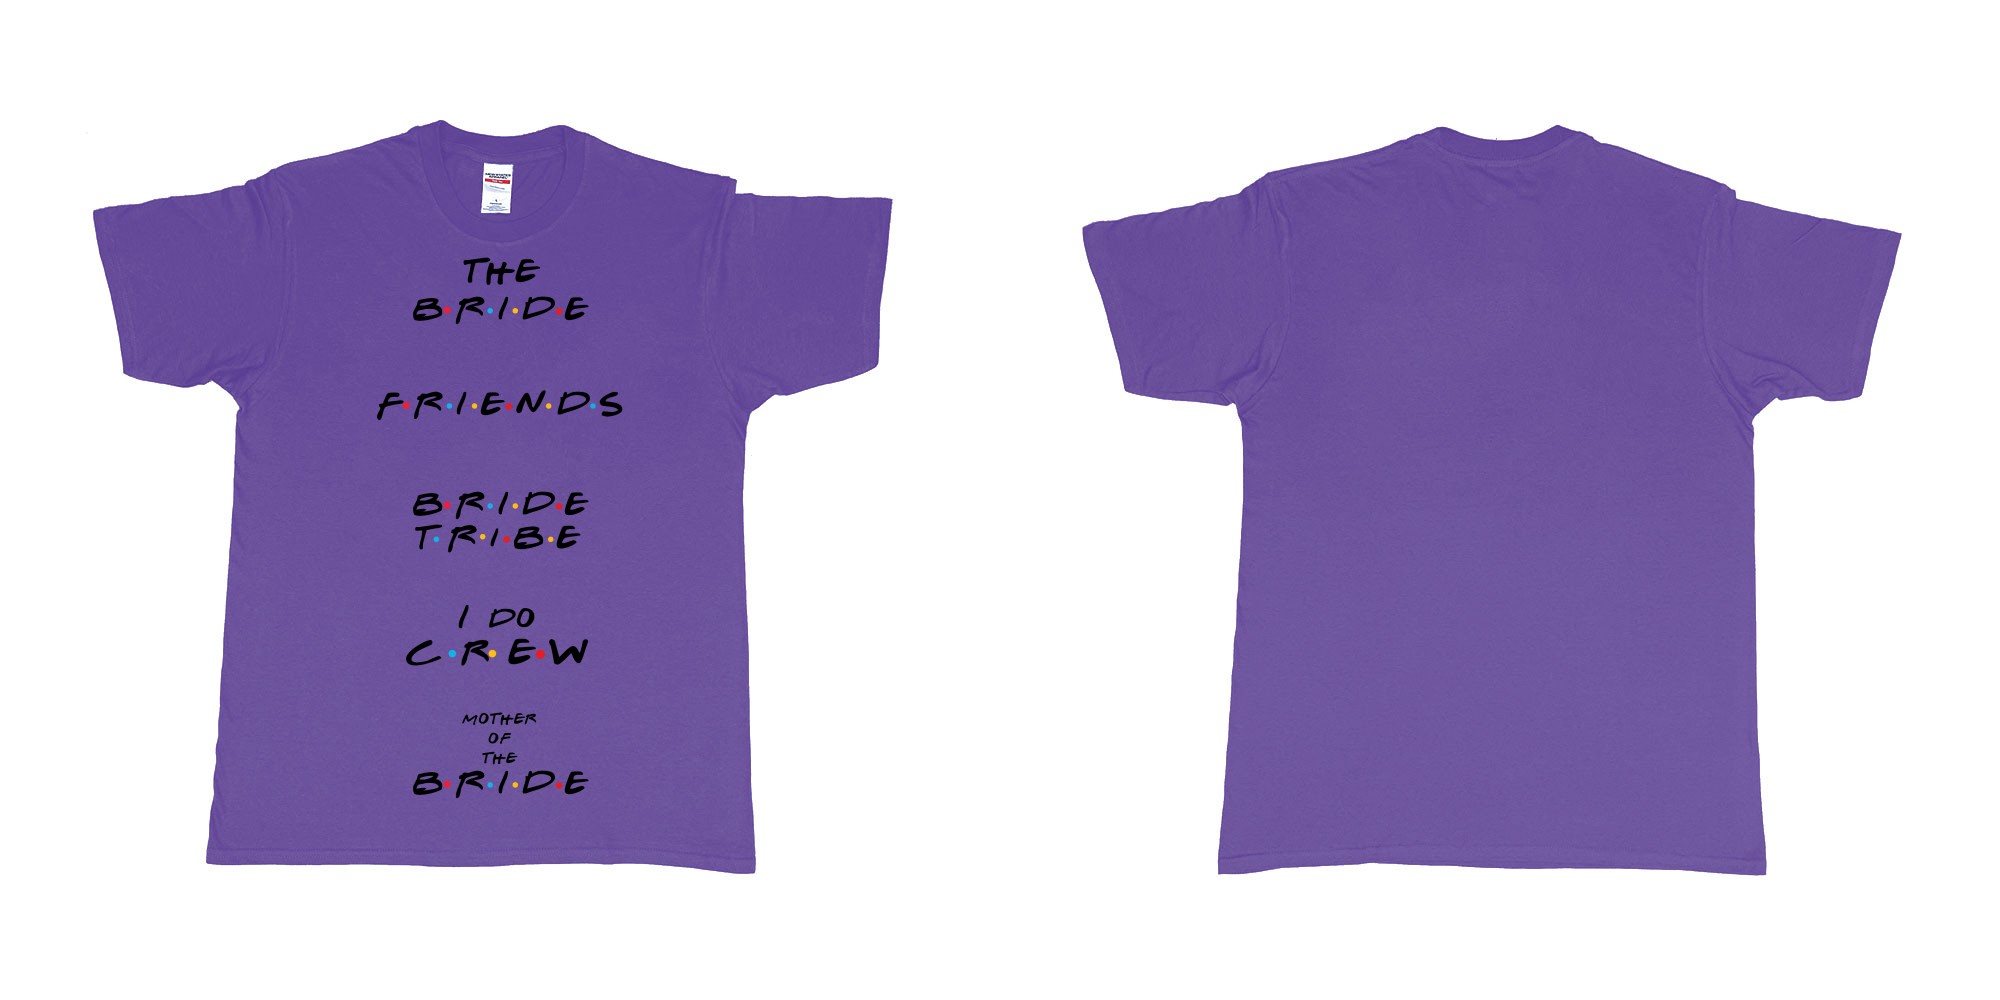 Custom tshirt design TPW friends in fabric color purple choice your own text made in Bali by The Pirate Way